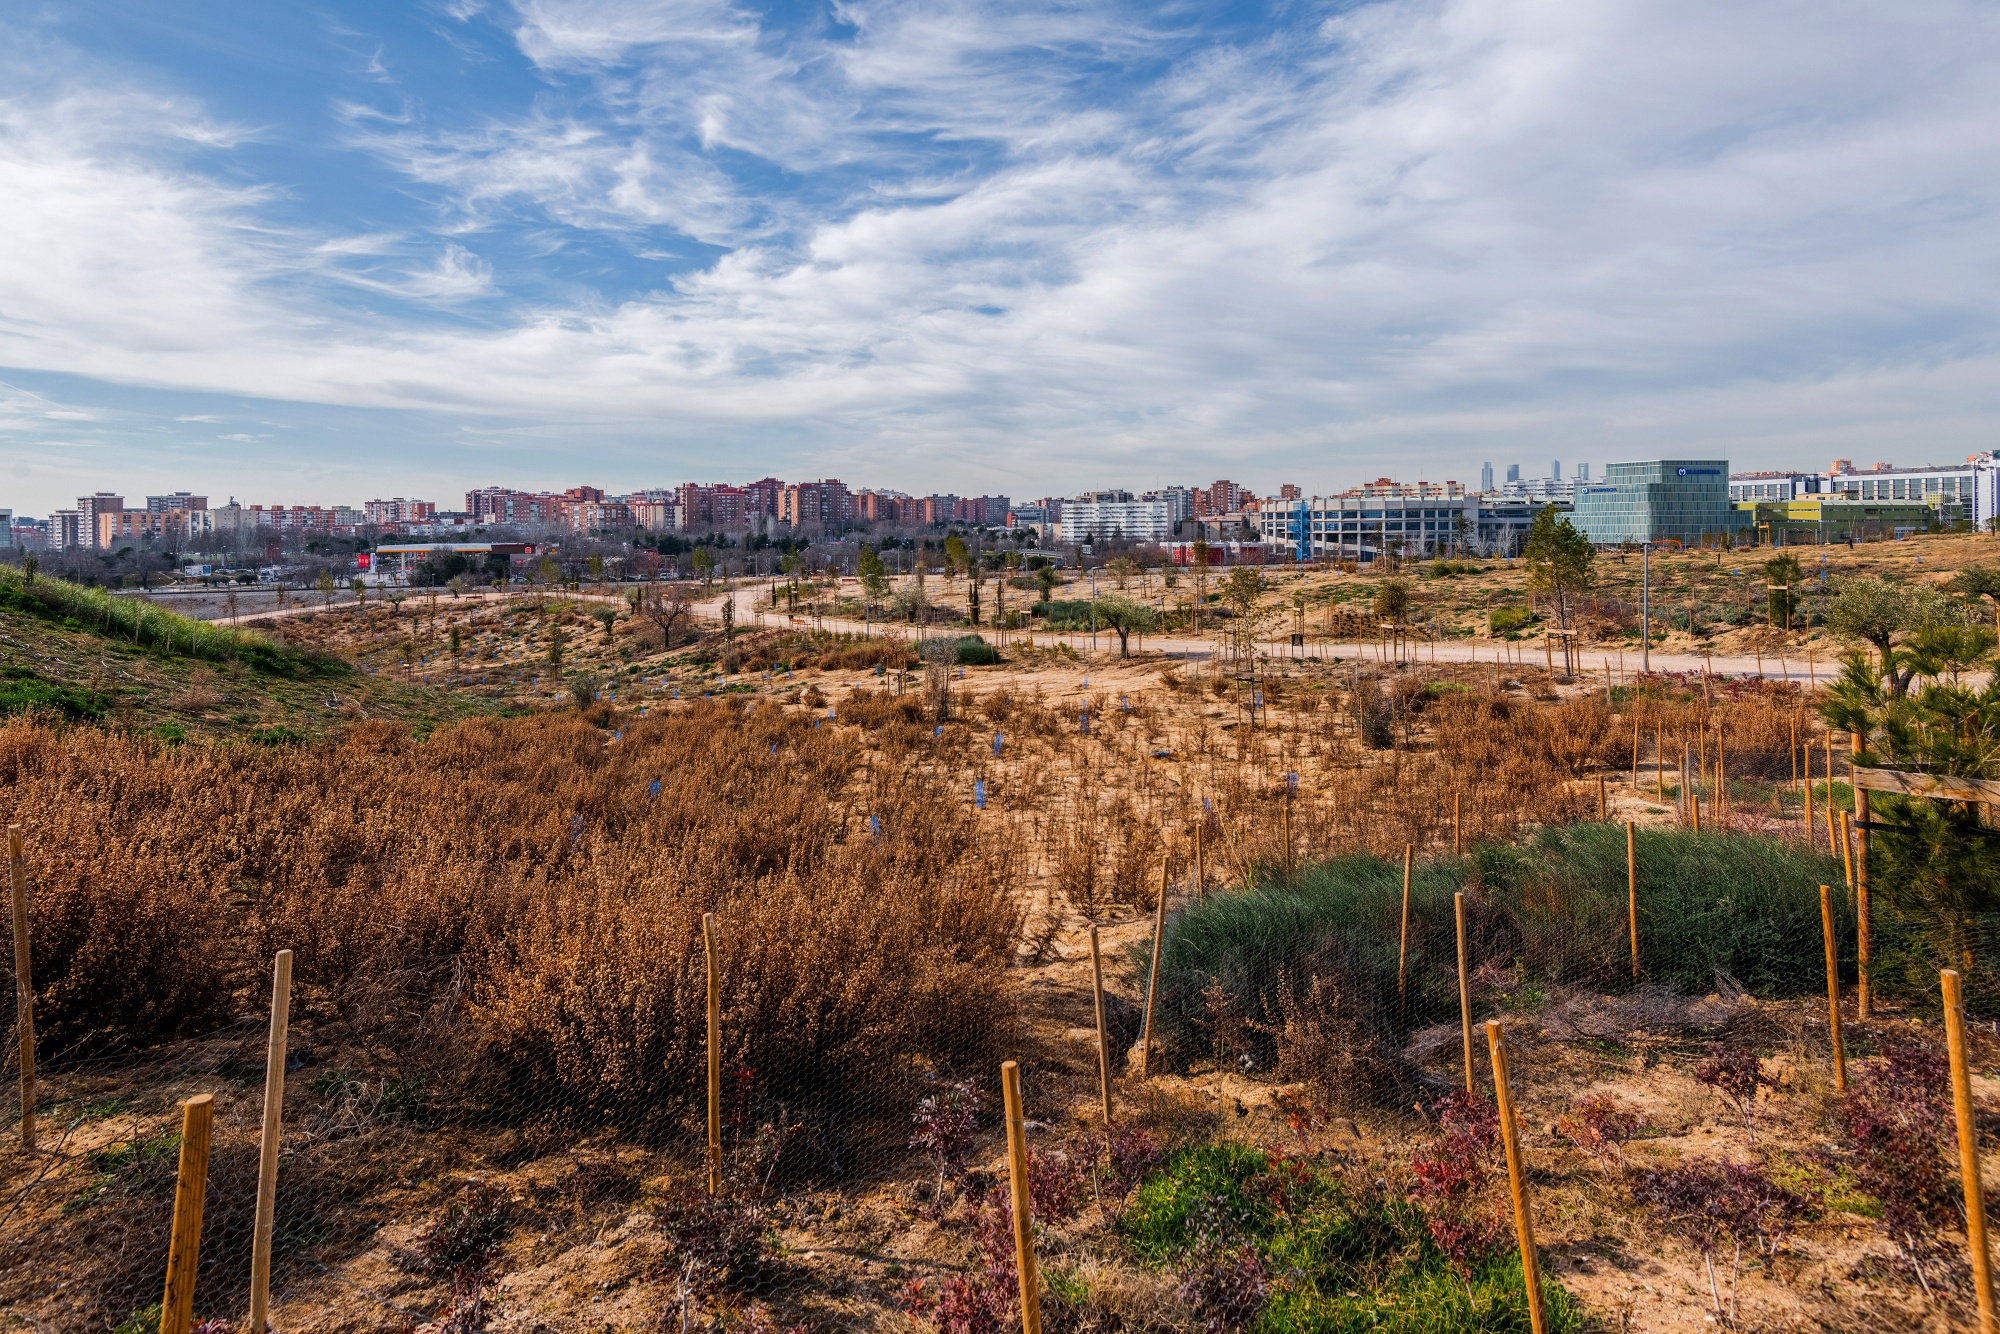 Extreme Weather Hampers Madrid's Urban Forest Plans - Bloomberg